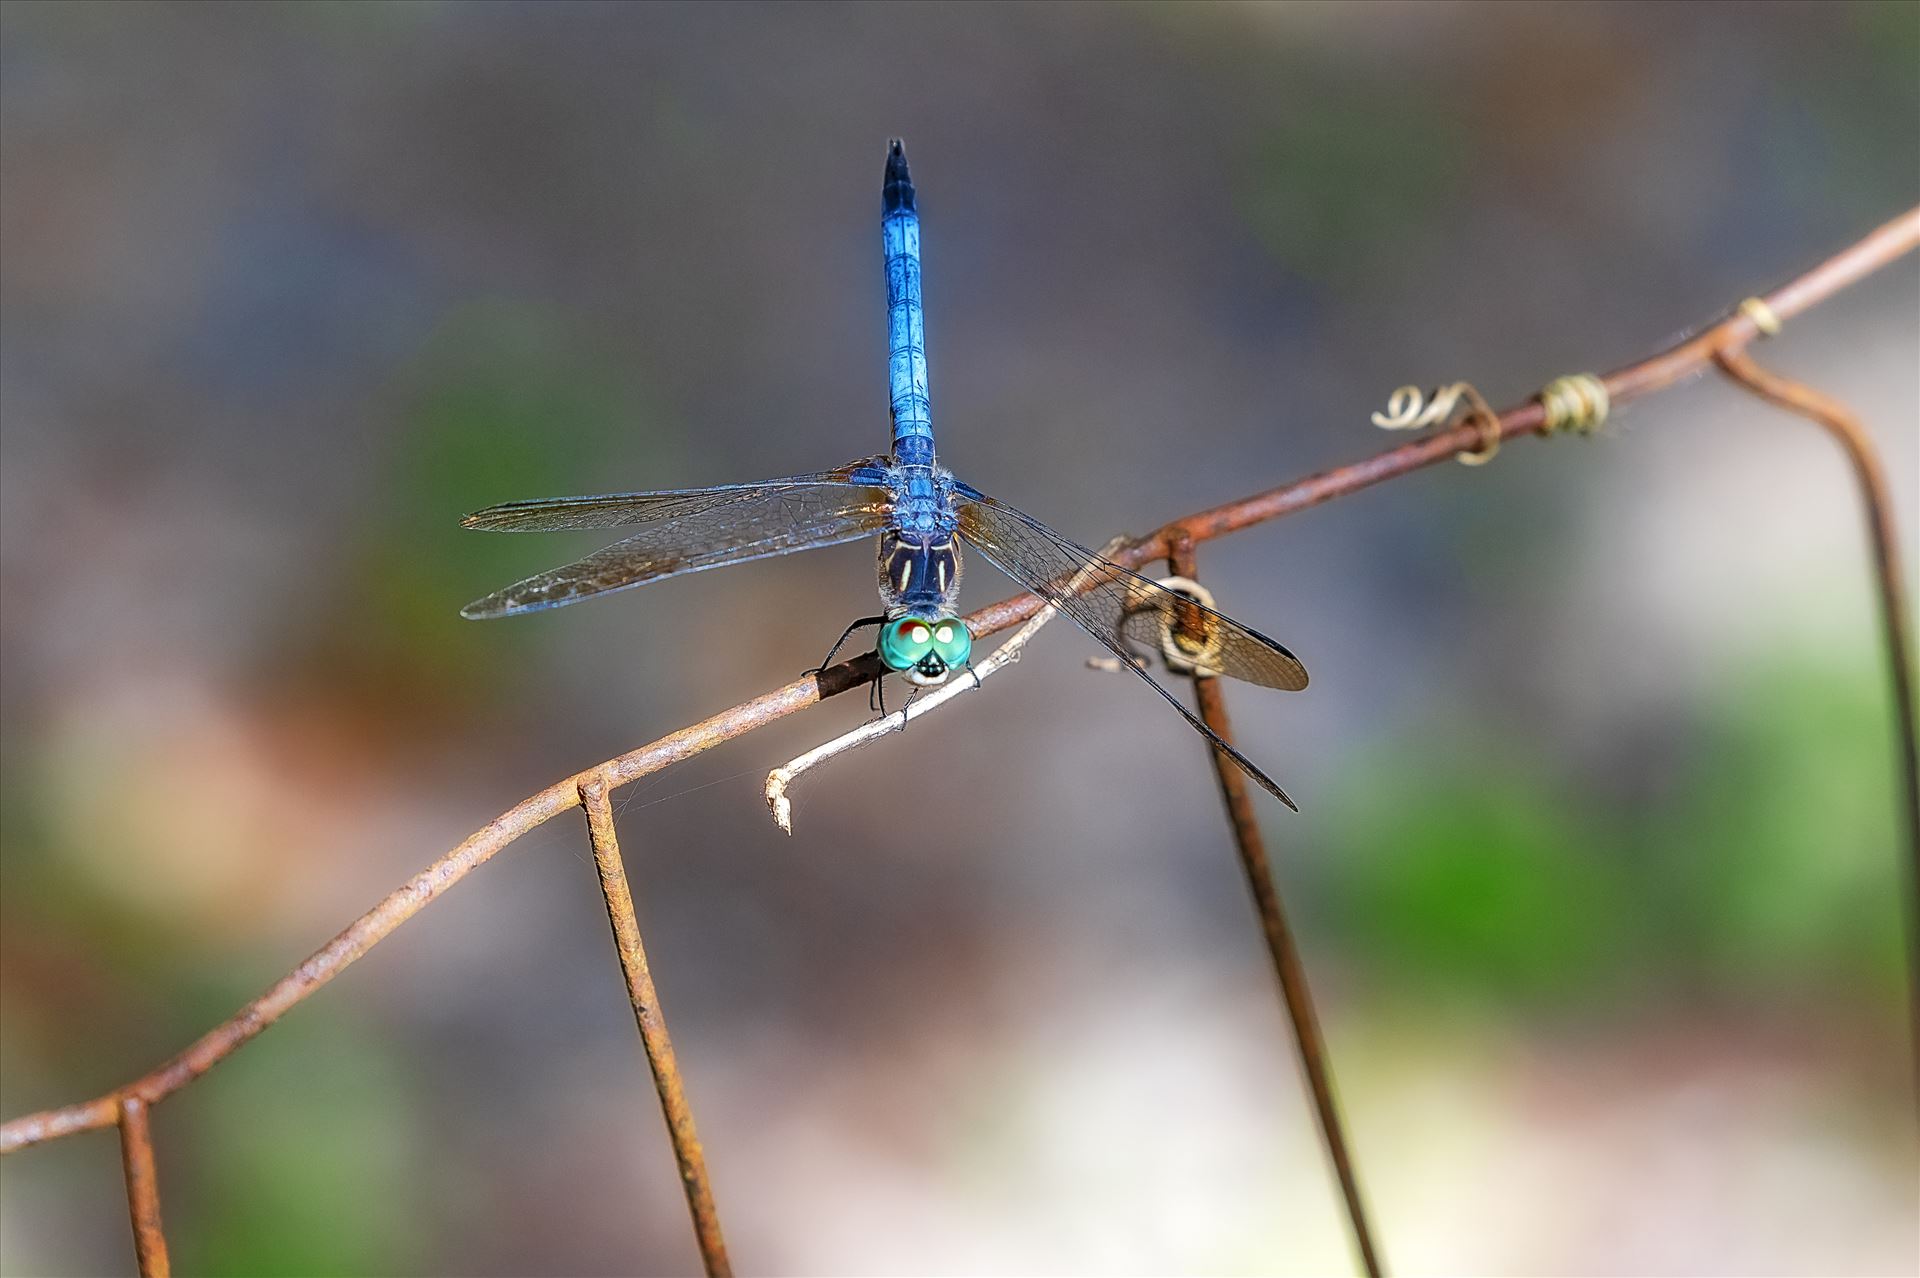 blue green dragonfly on rusted wire fence ss as sf 8500186.jpg  by Terry Kelly Photography